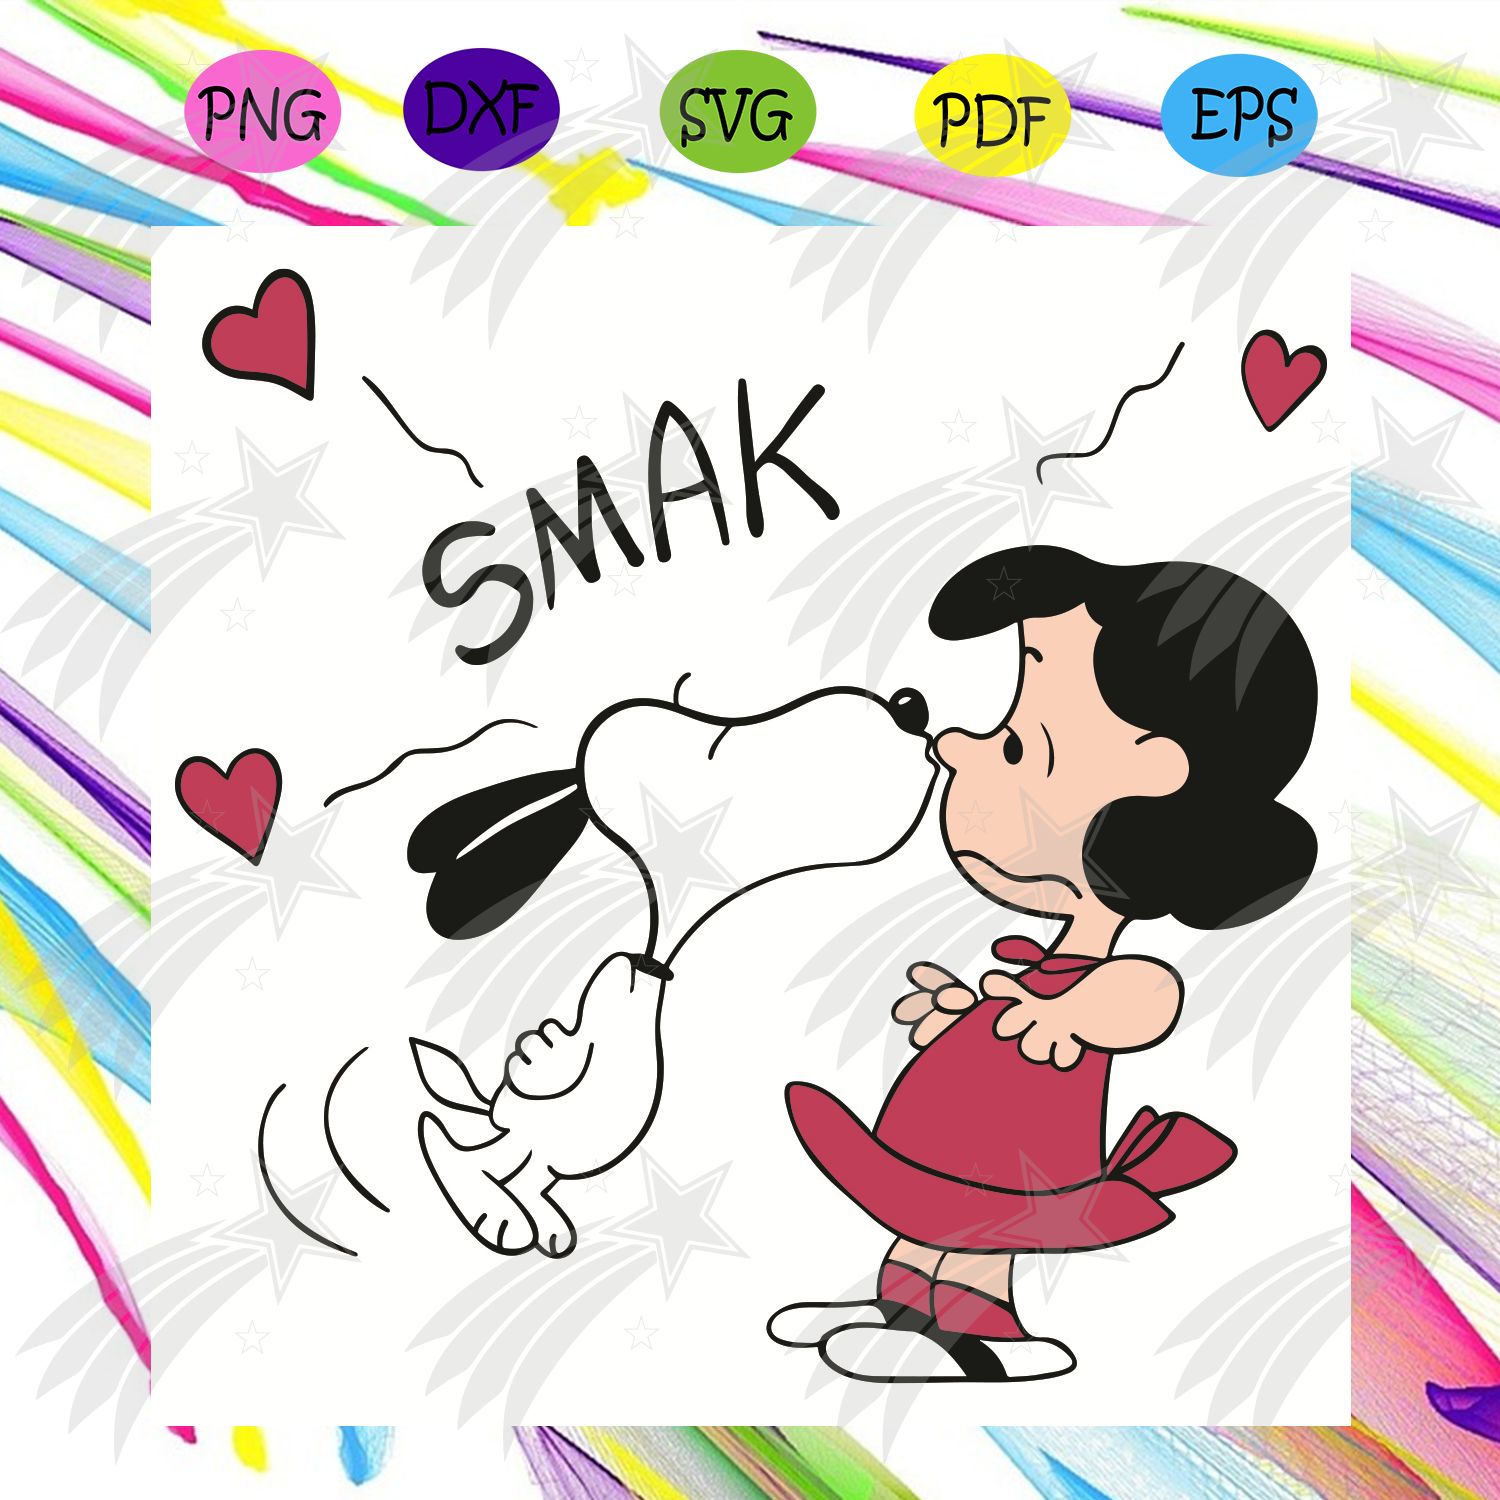 Download Smak Snoopy Lucy Svg Valentines Svg Snoopy Svg Lucy Svg Kissing Svg Hearts Svg Snoopy Kisses